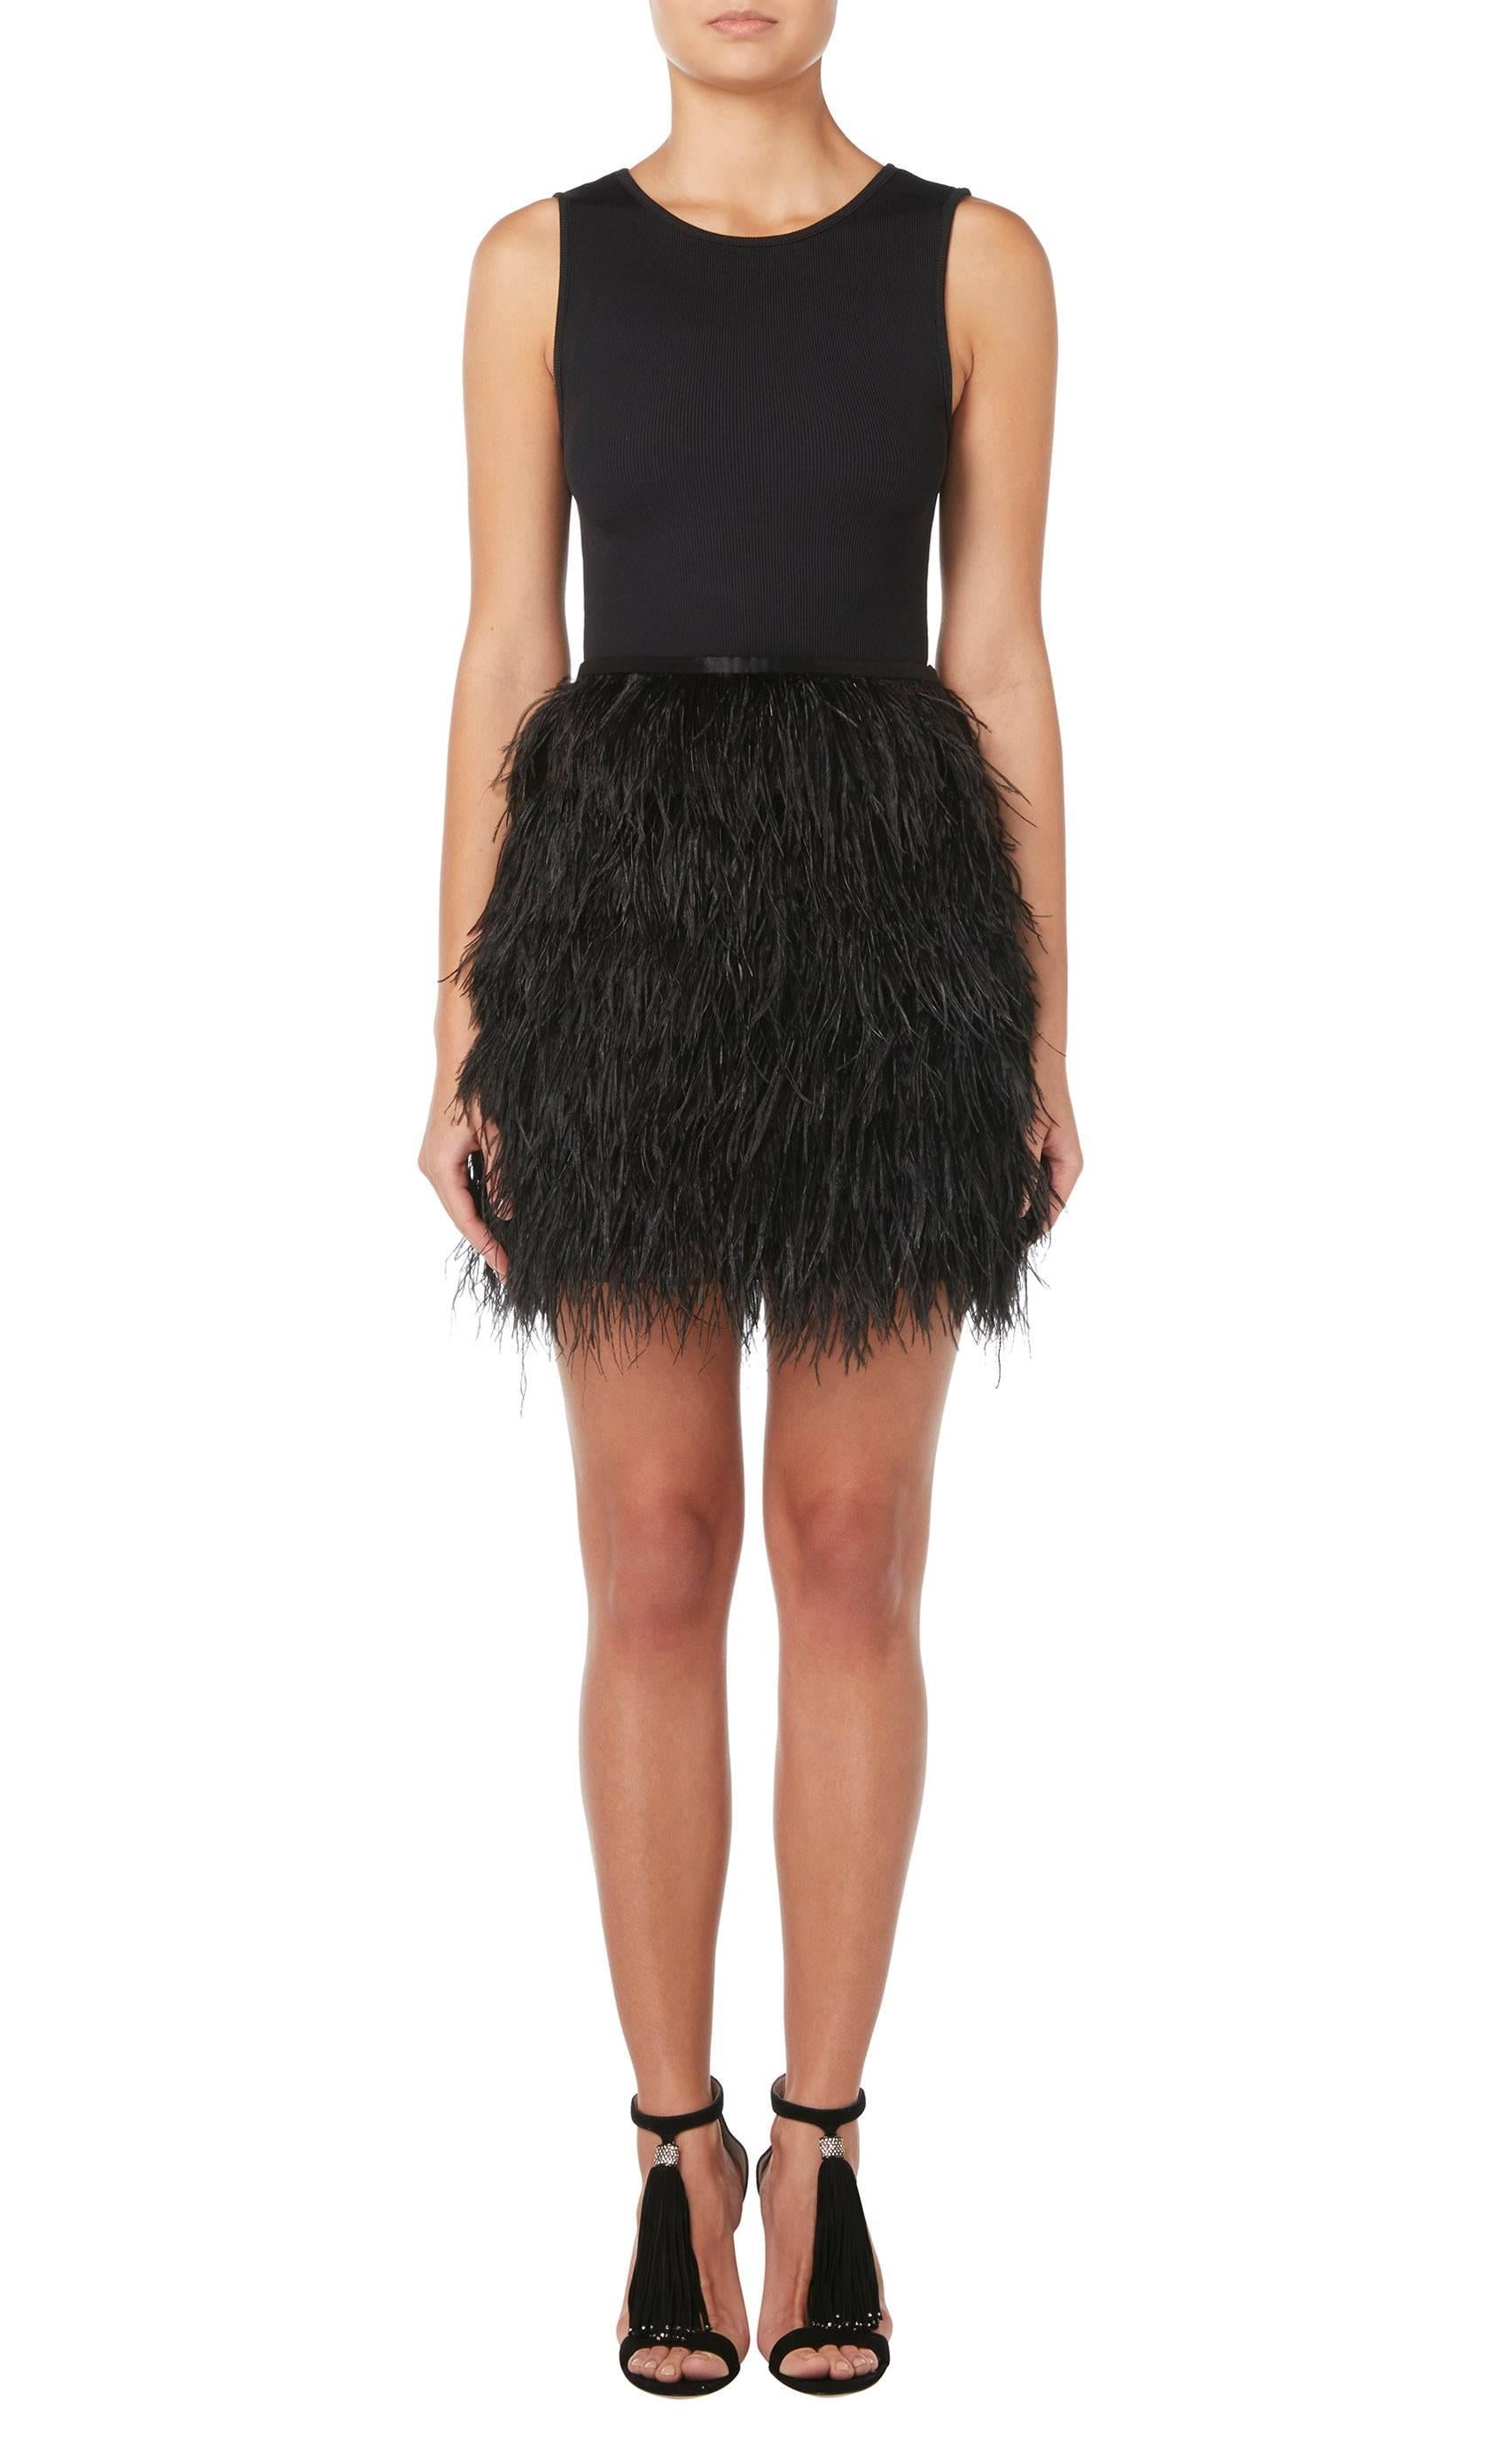 Constructed in black ostrich feathers
Black satin waistband
Zip fastening to the side
Excellent condition with the original label, lining and fastenings
Professionally dry cleaned and ozone-treated
Inspected by a couture-trained seamstress
All